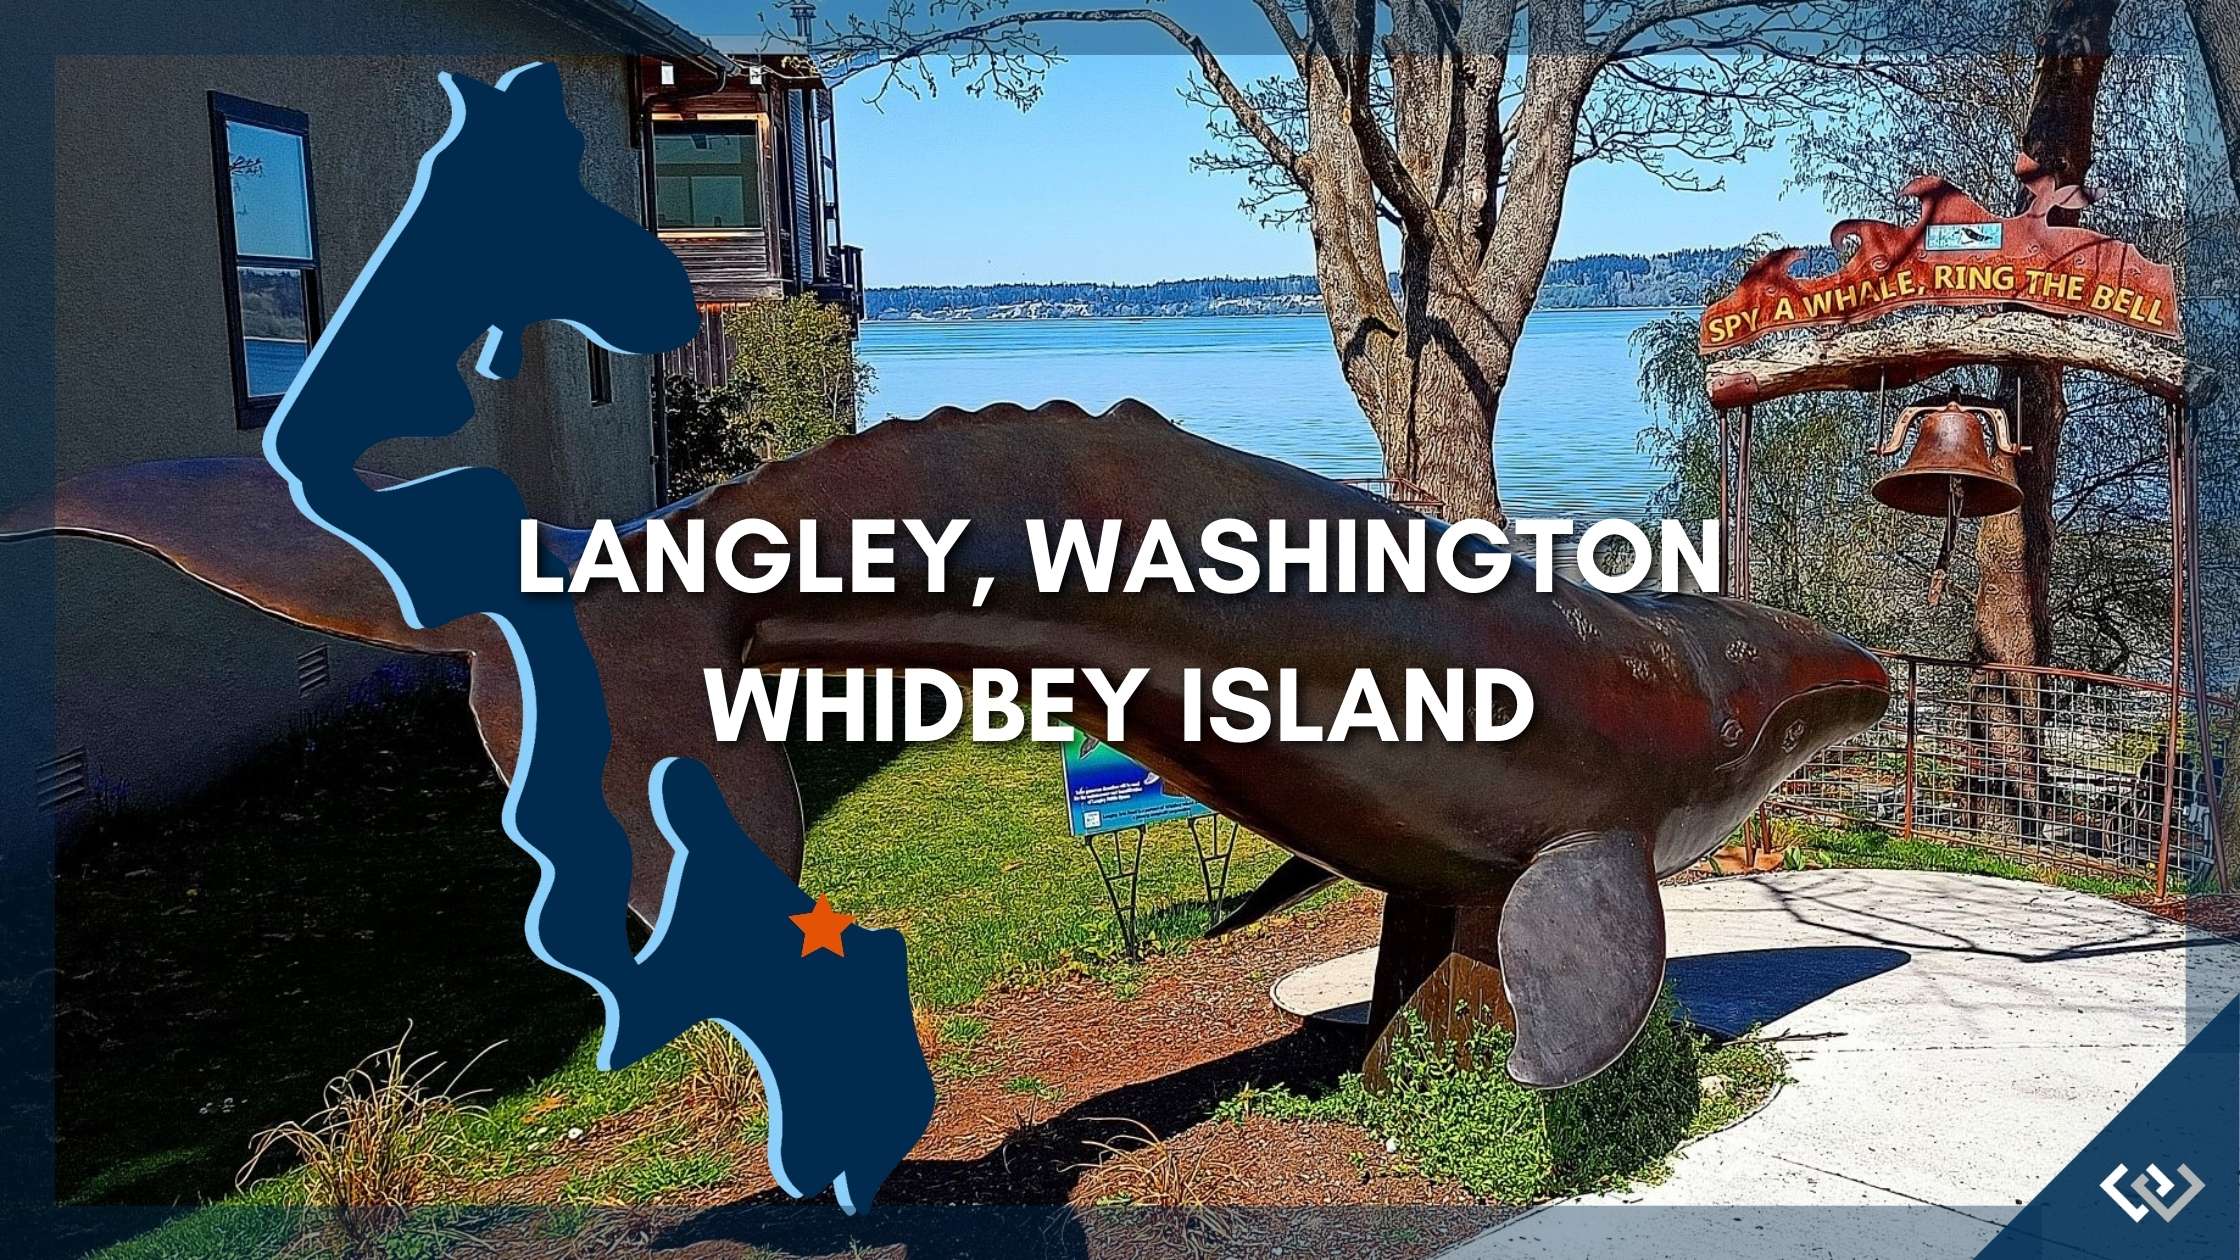 Windermere Whidbey Real Estate | LANGLEY WA photo credit Si Fisher